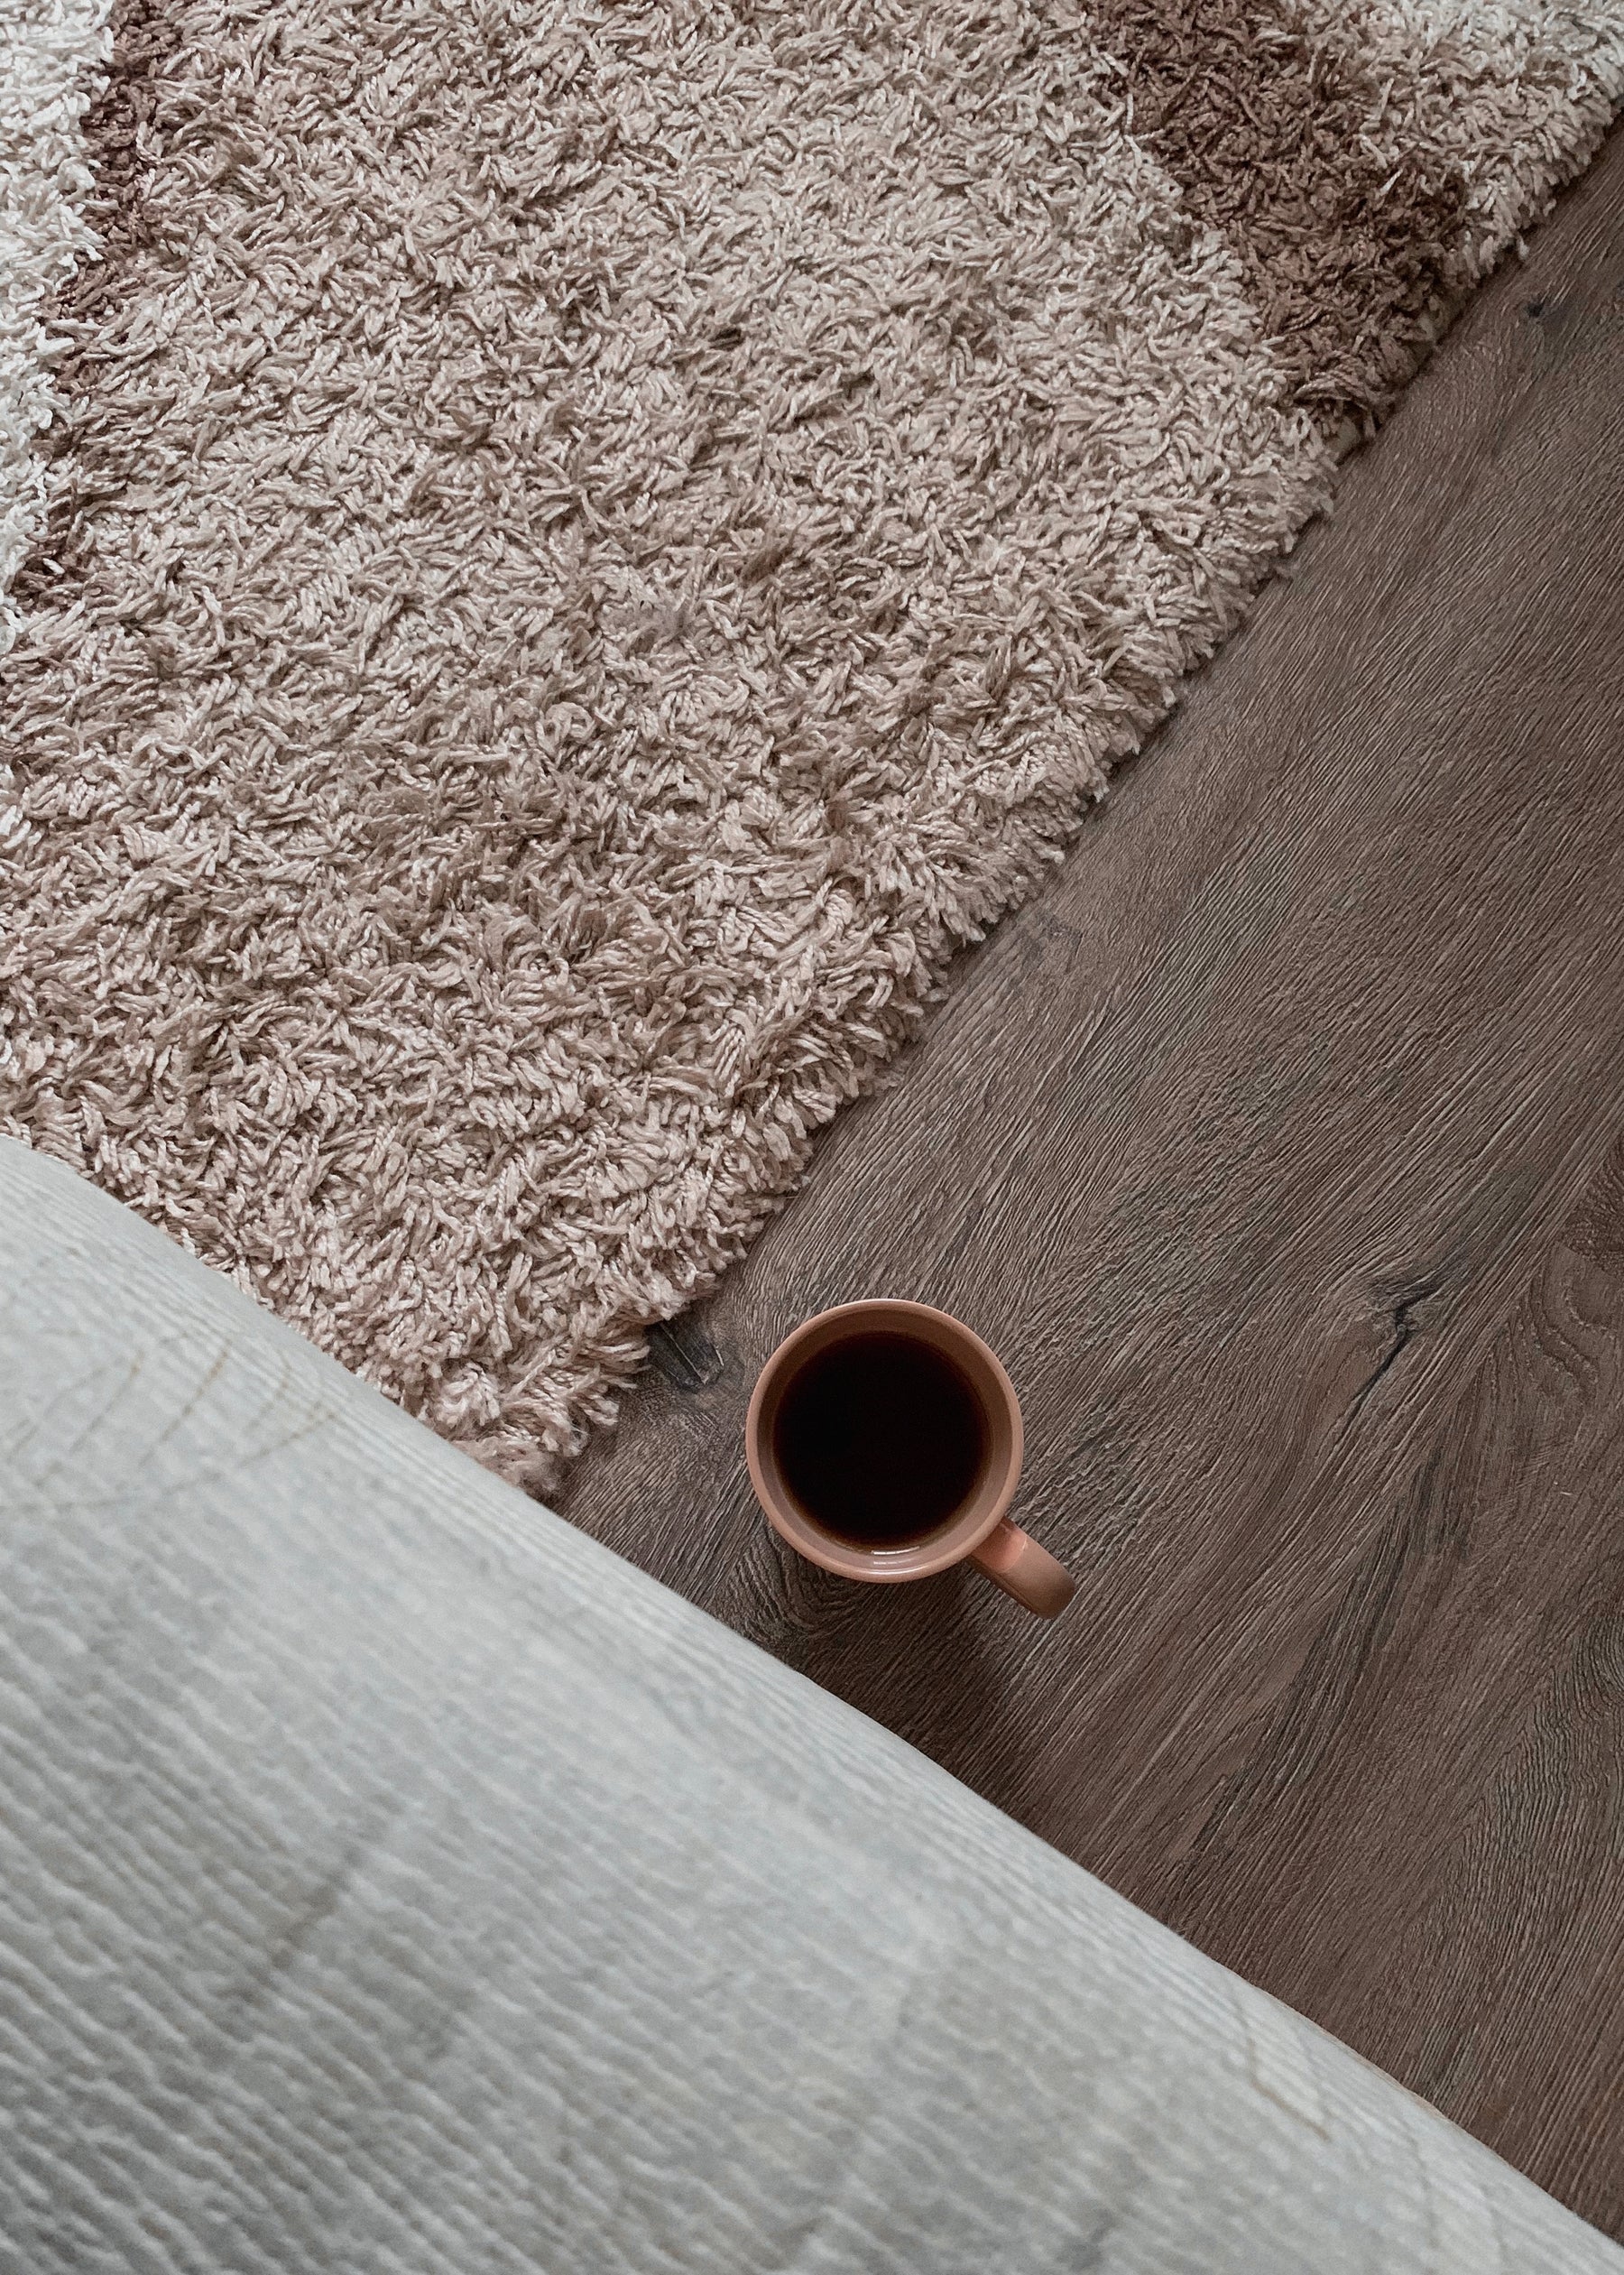 The Ultimate Guide to Shopping for Area Rugs Online: Finding the Perfect Rug for Your Space with KB Rugs